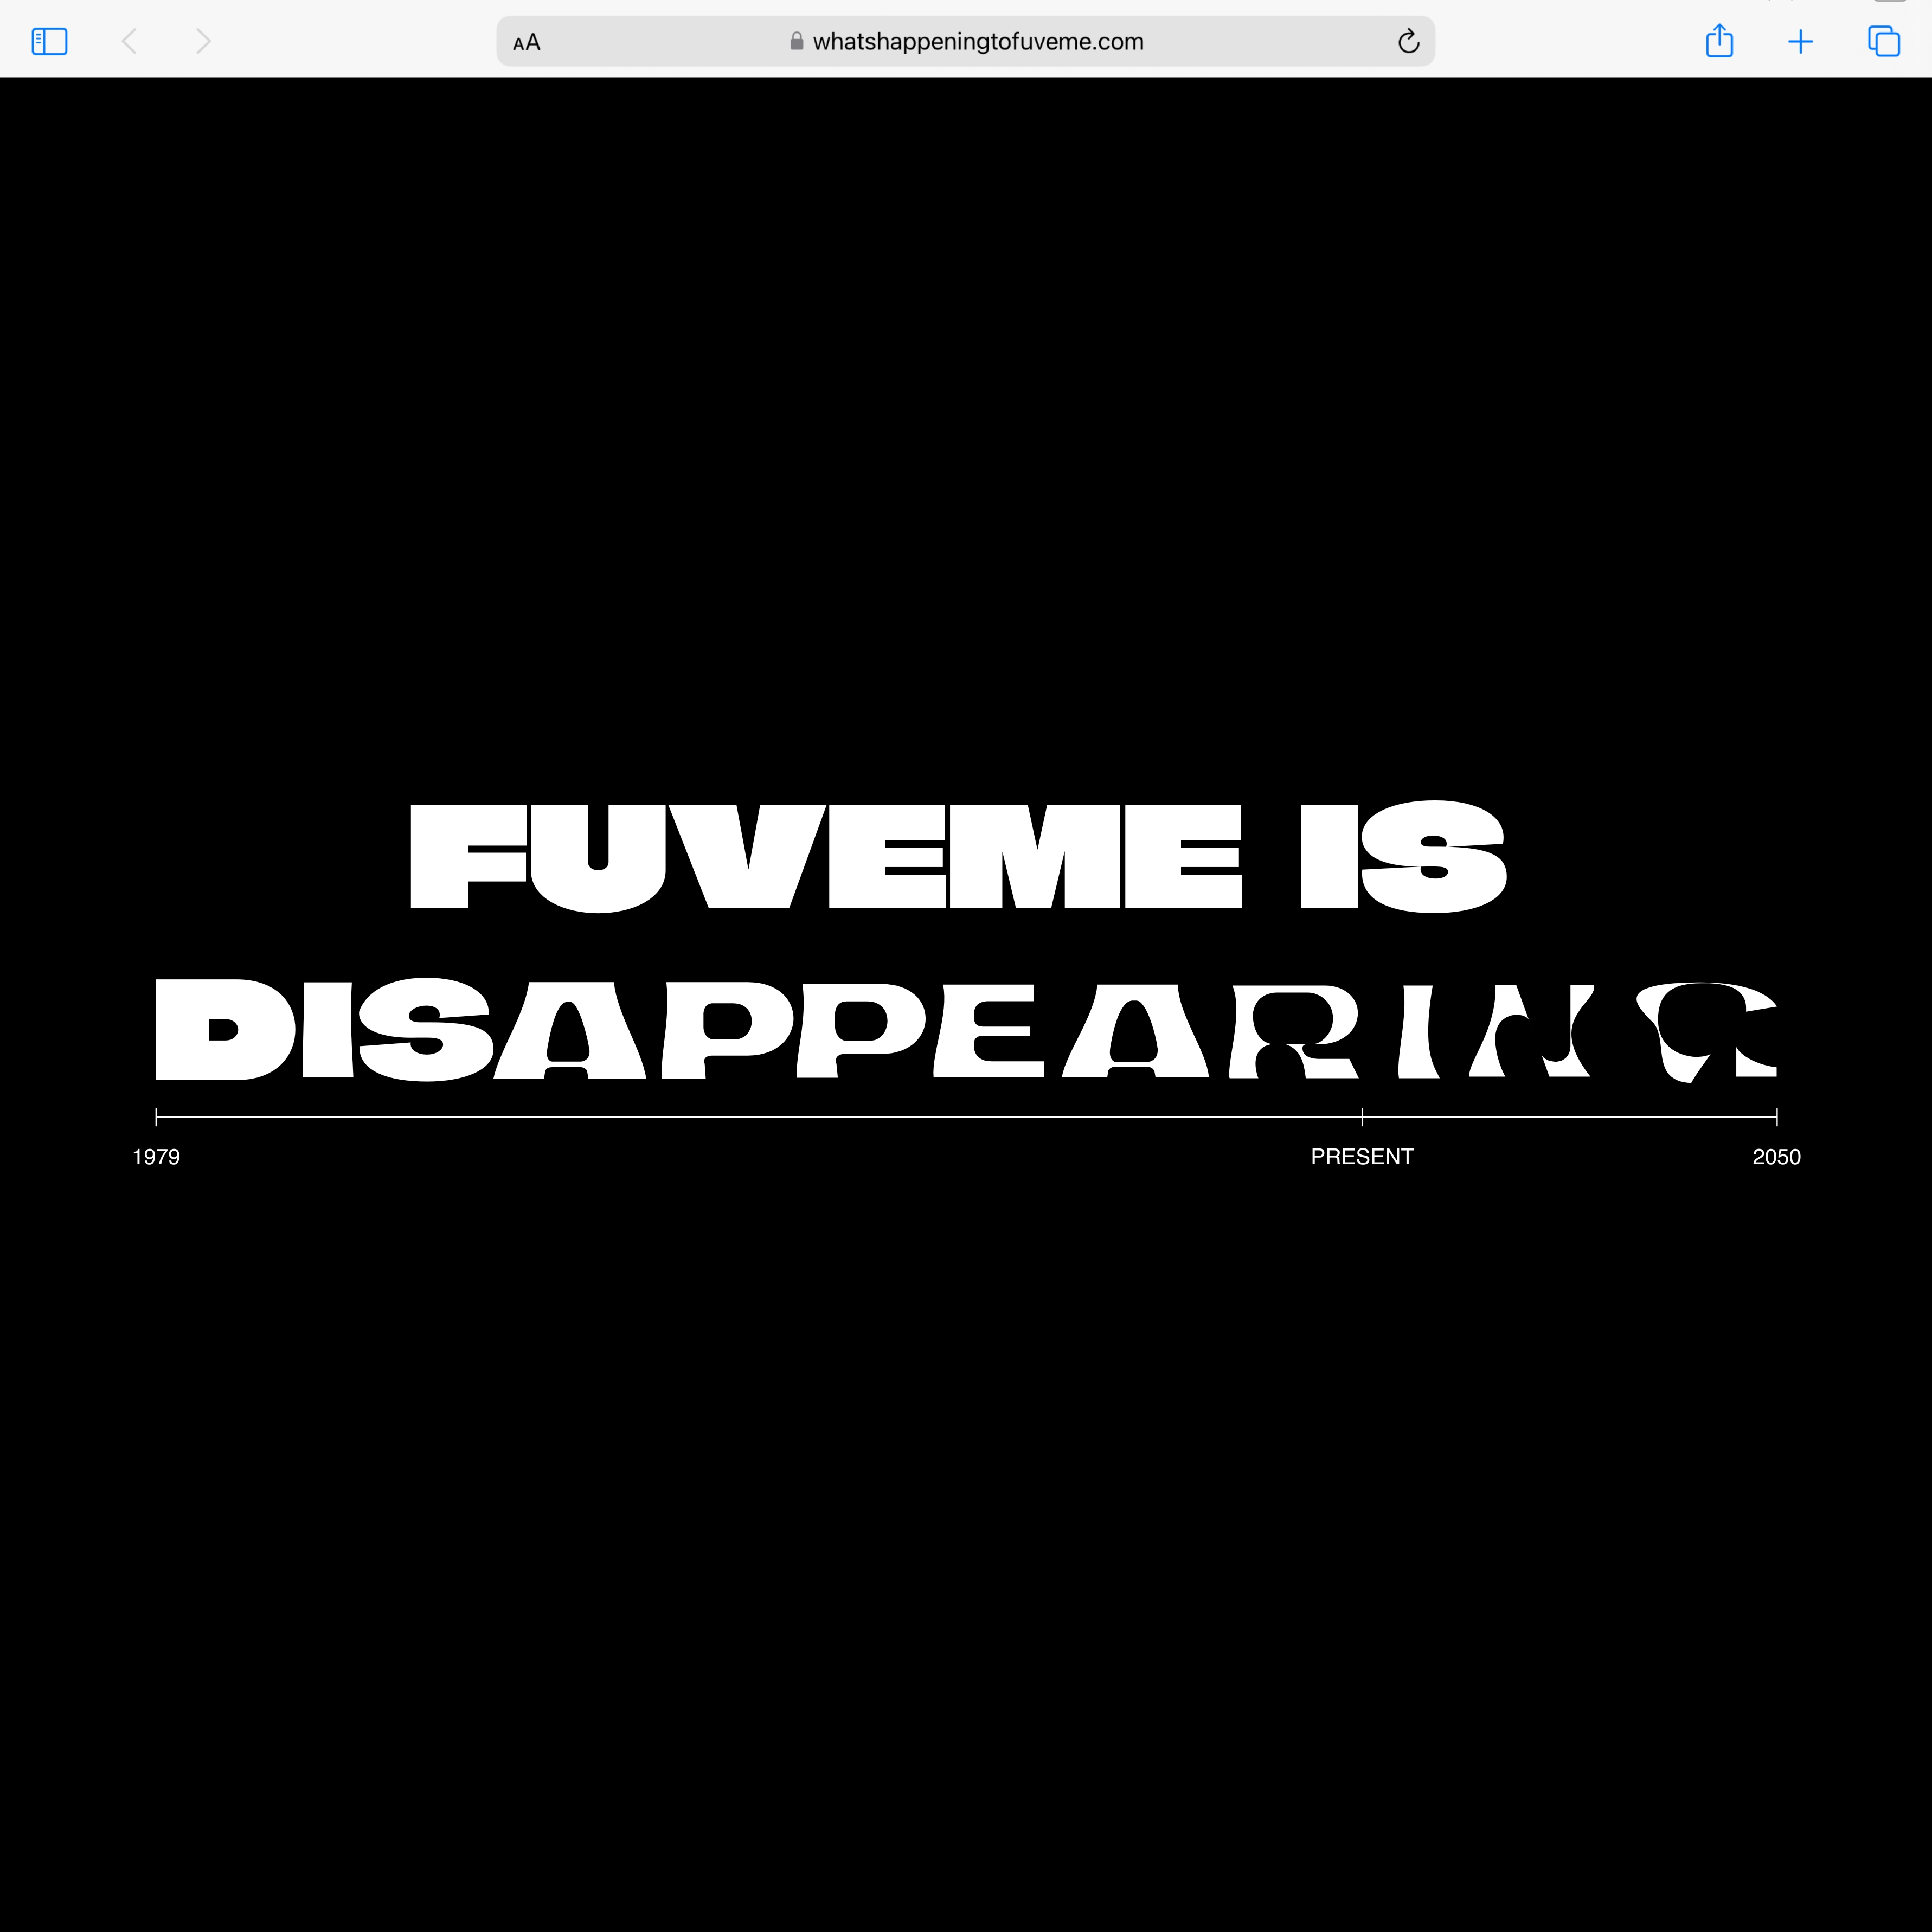 Don’t Be A Stranger Visualizes Urgency & Action for What’s Happening to Fuveme